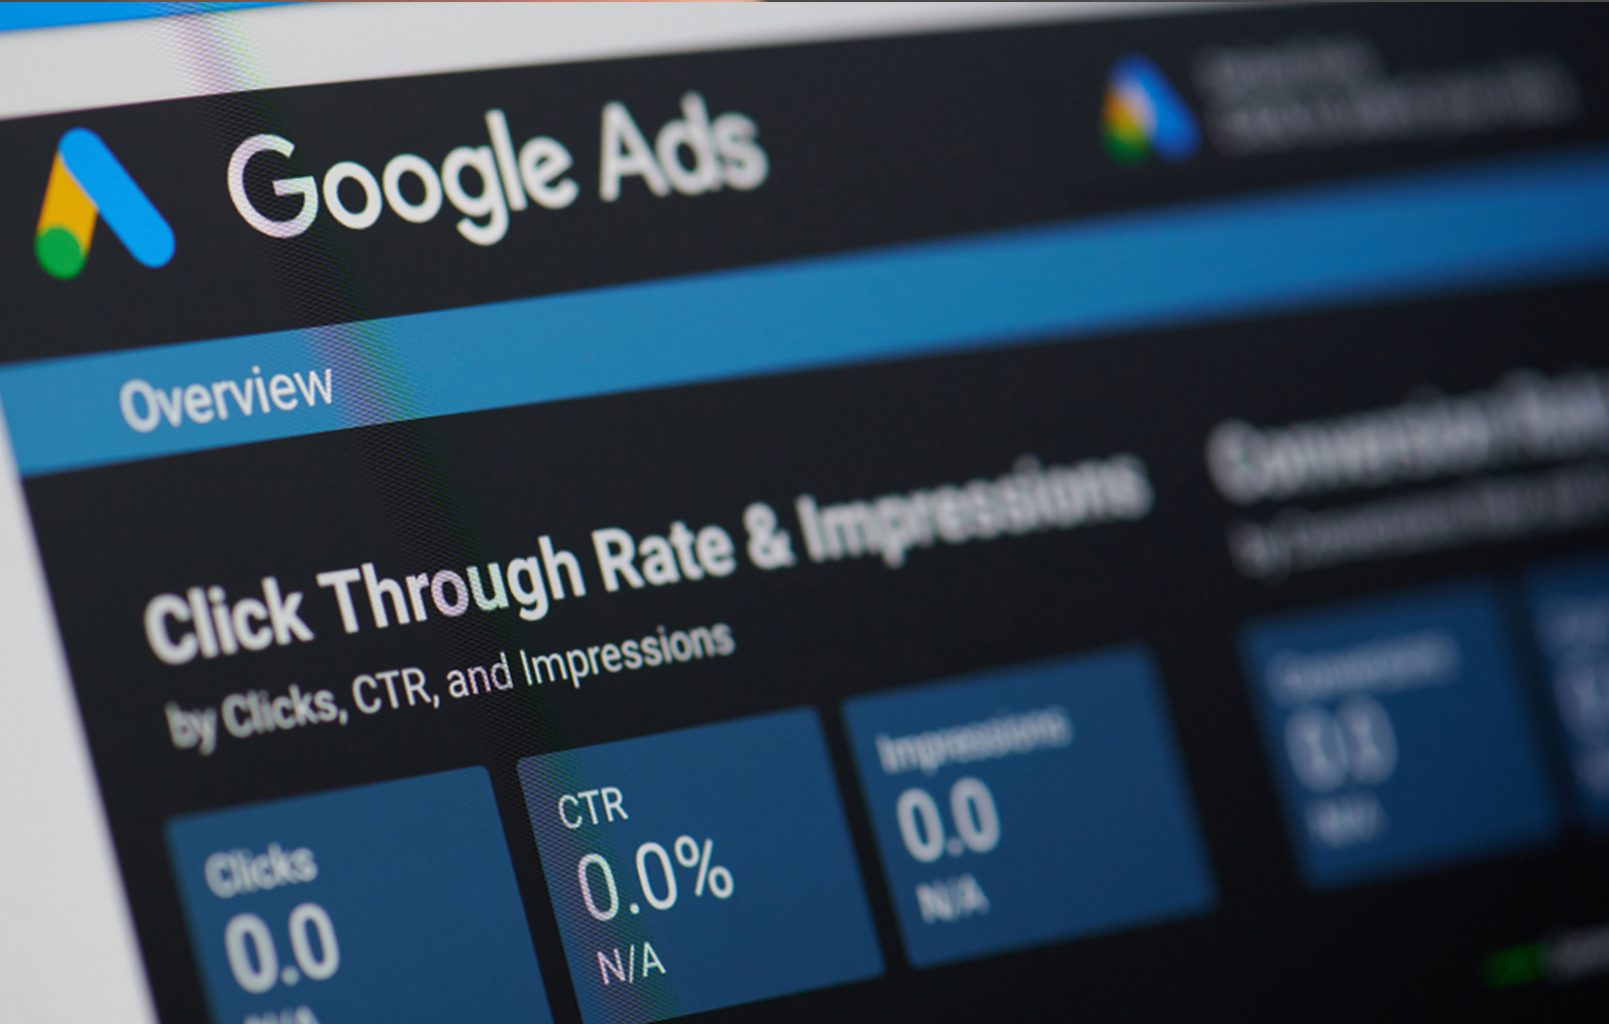 The Google Ads Optimization Score provides users with insight into how to optimize their Ads campaign.